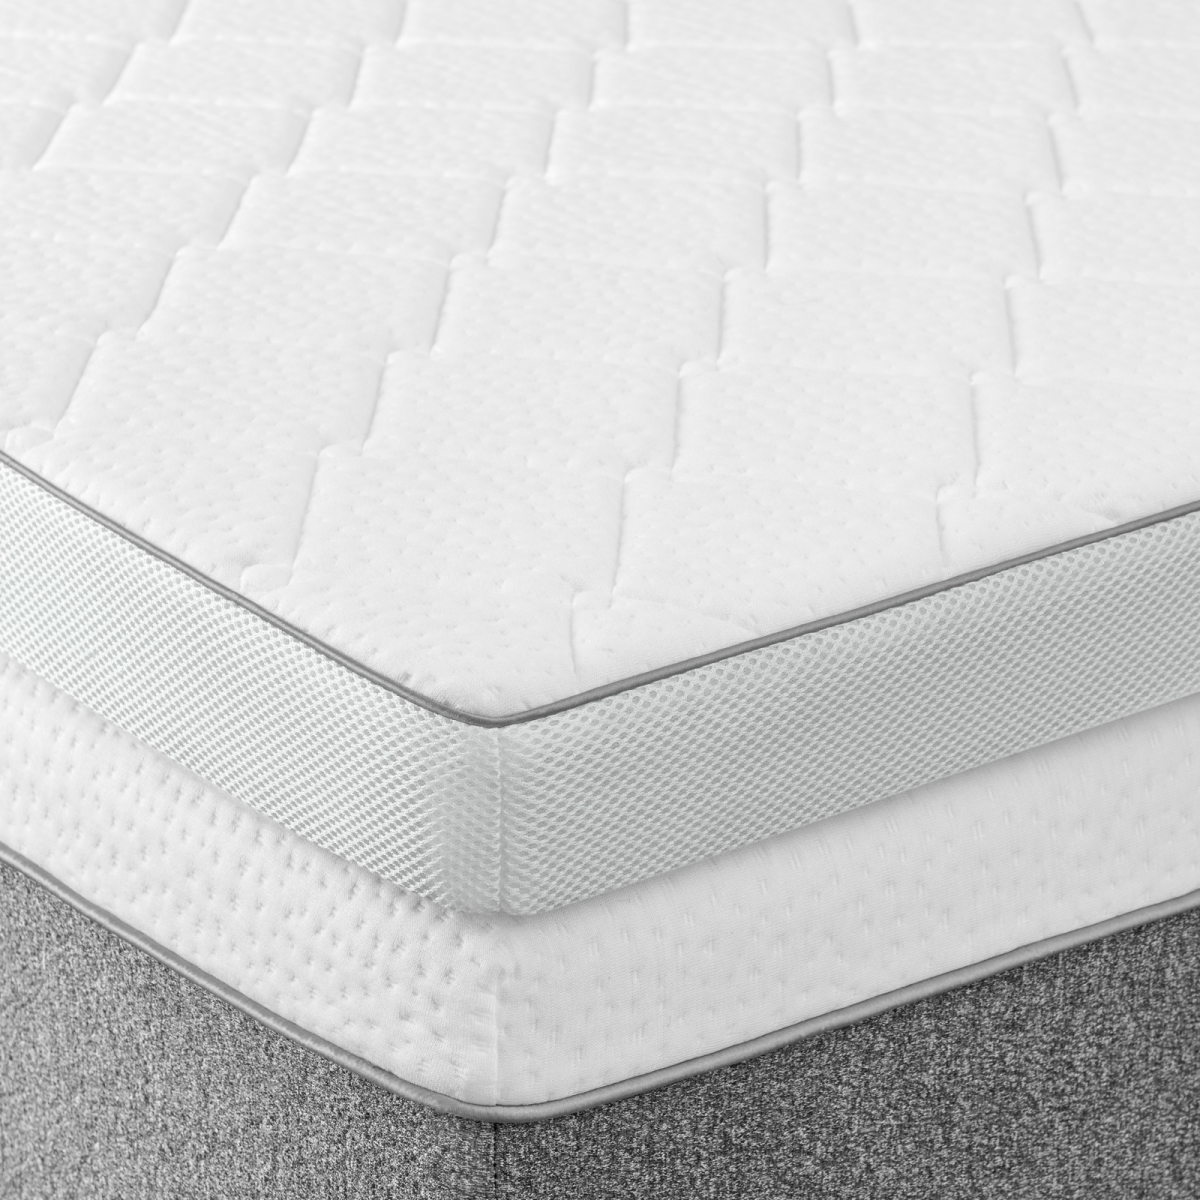 Panda Tq0009 3 In. Solace Sleep Quilted & Ventilated Memory Foam Slab Mattress Topper With Cover & Non Solid Bottom, Queen